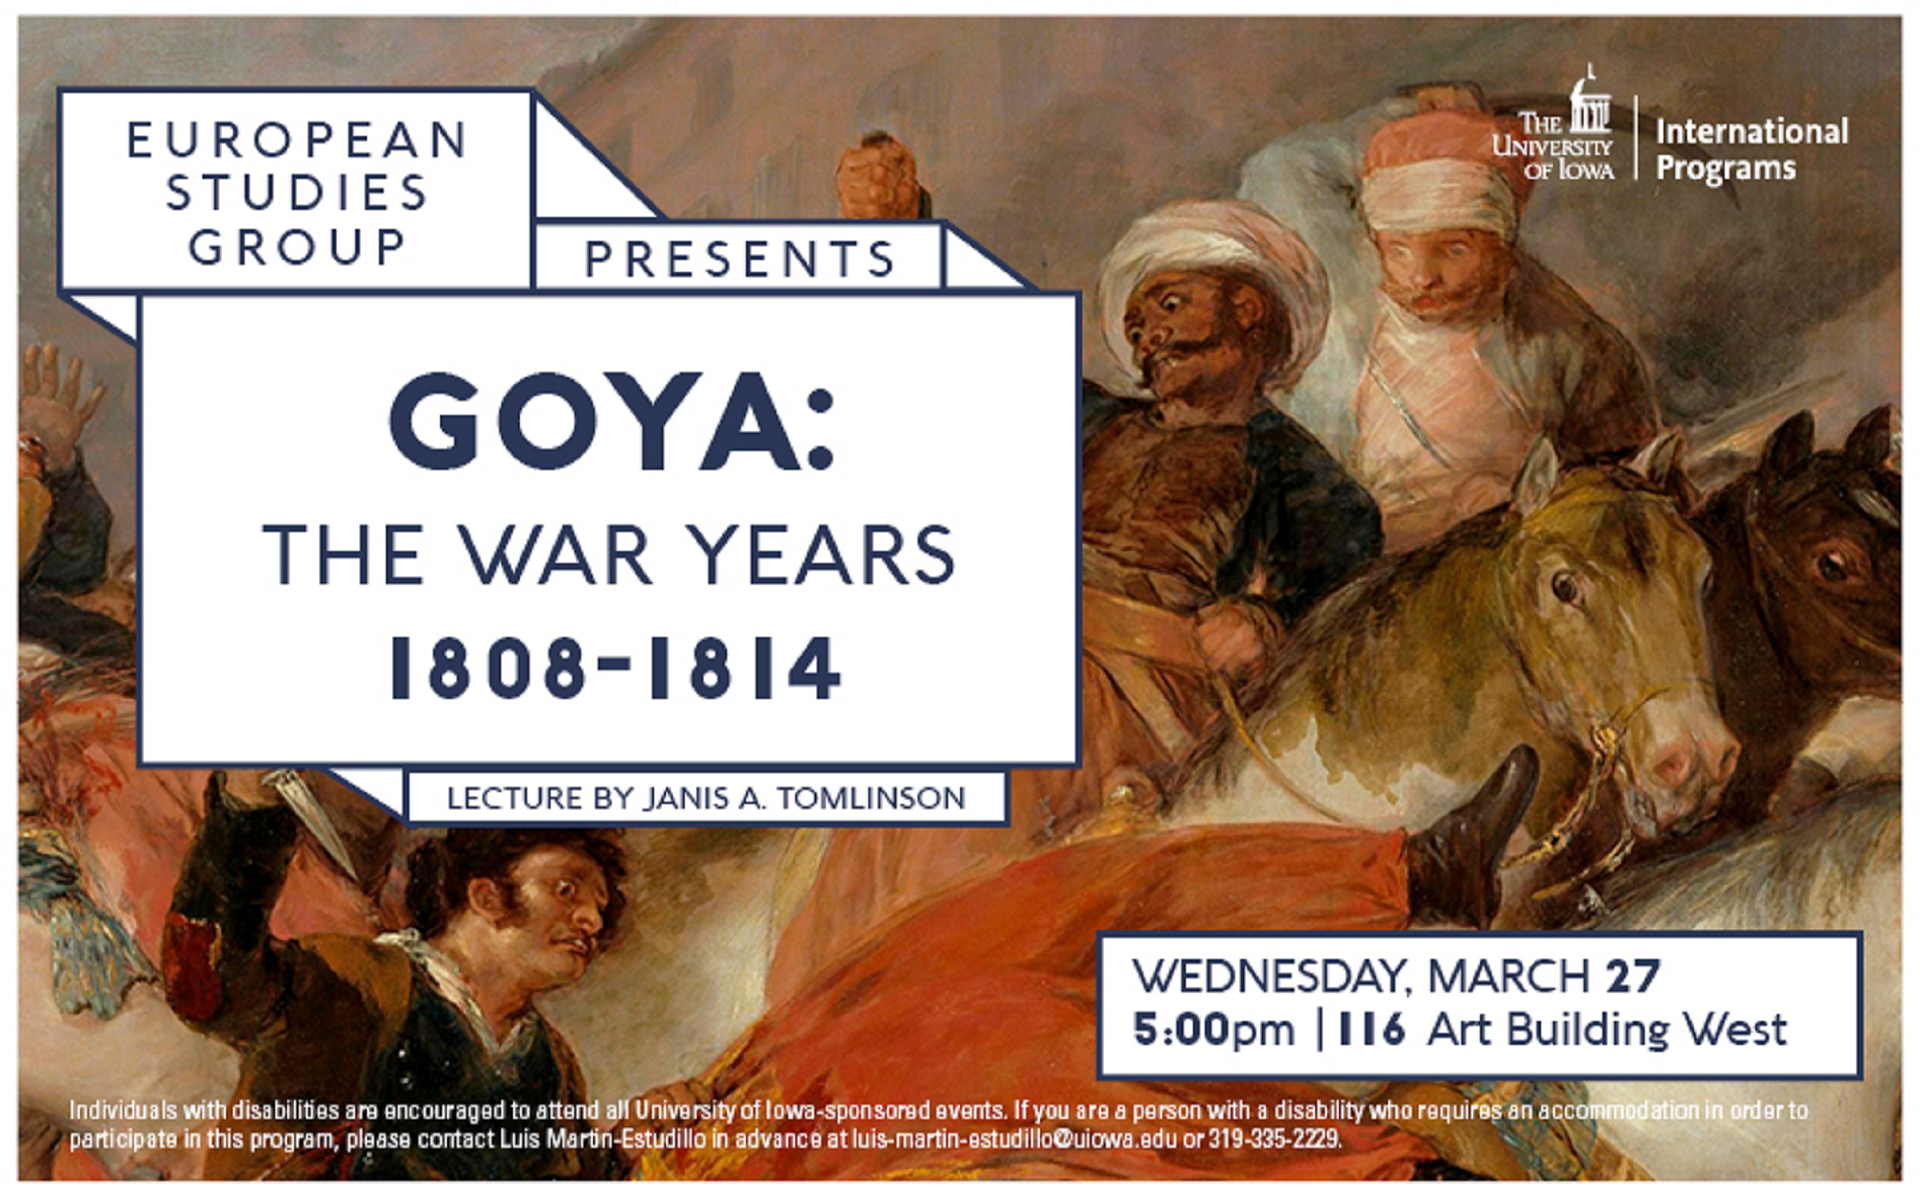 European studies group GOYA: The war years 1808-1814 lecture by janis A. Tomlinson Wednesday March27, 5 pm 116 Art Building West